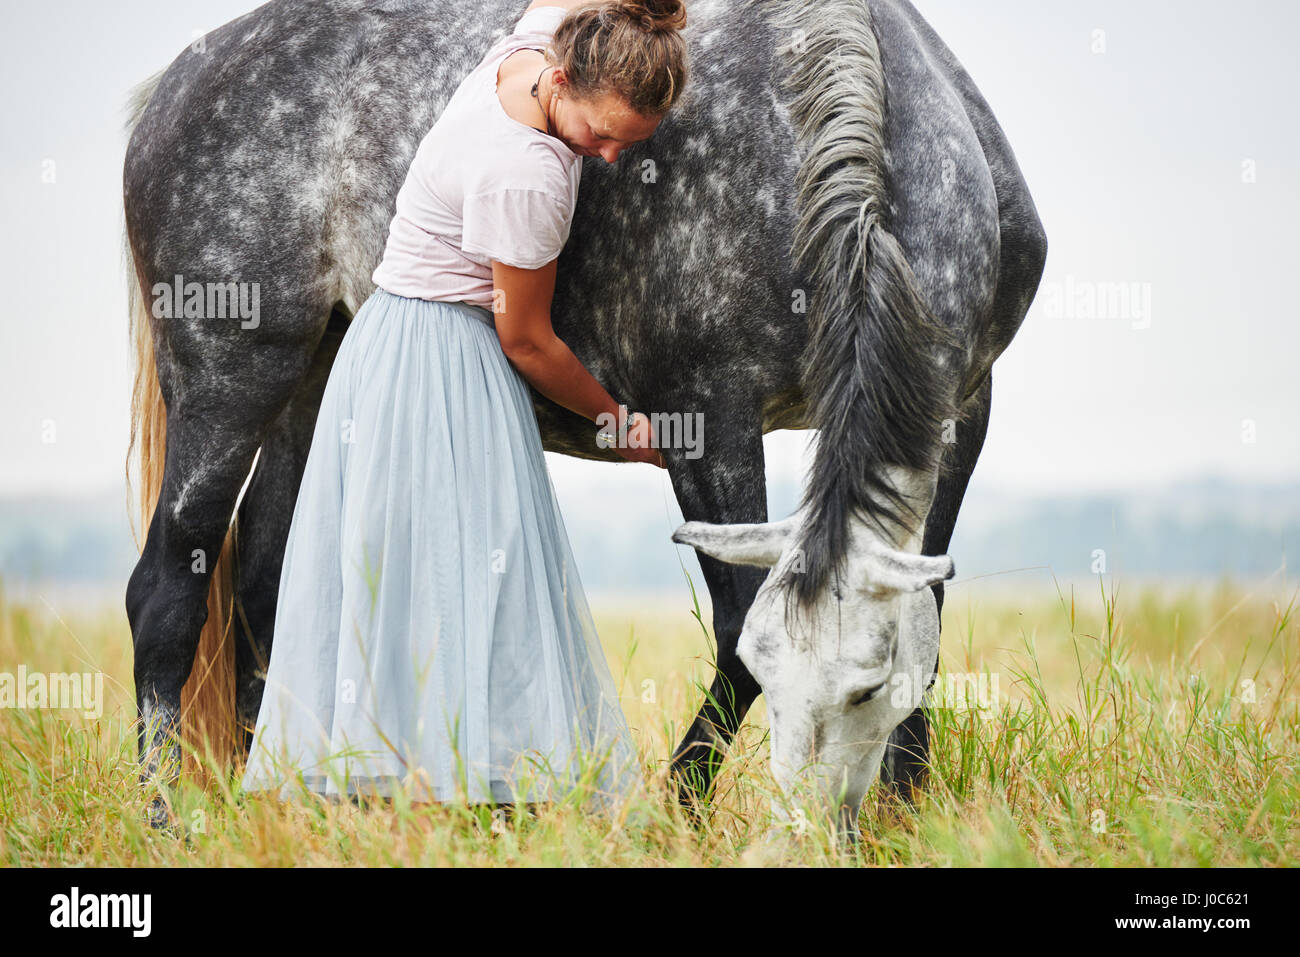 Woman in skirt with arms around dapple grey horse in field Stock Photo